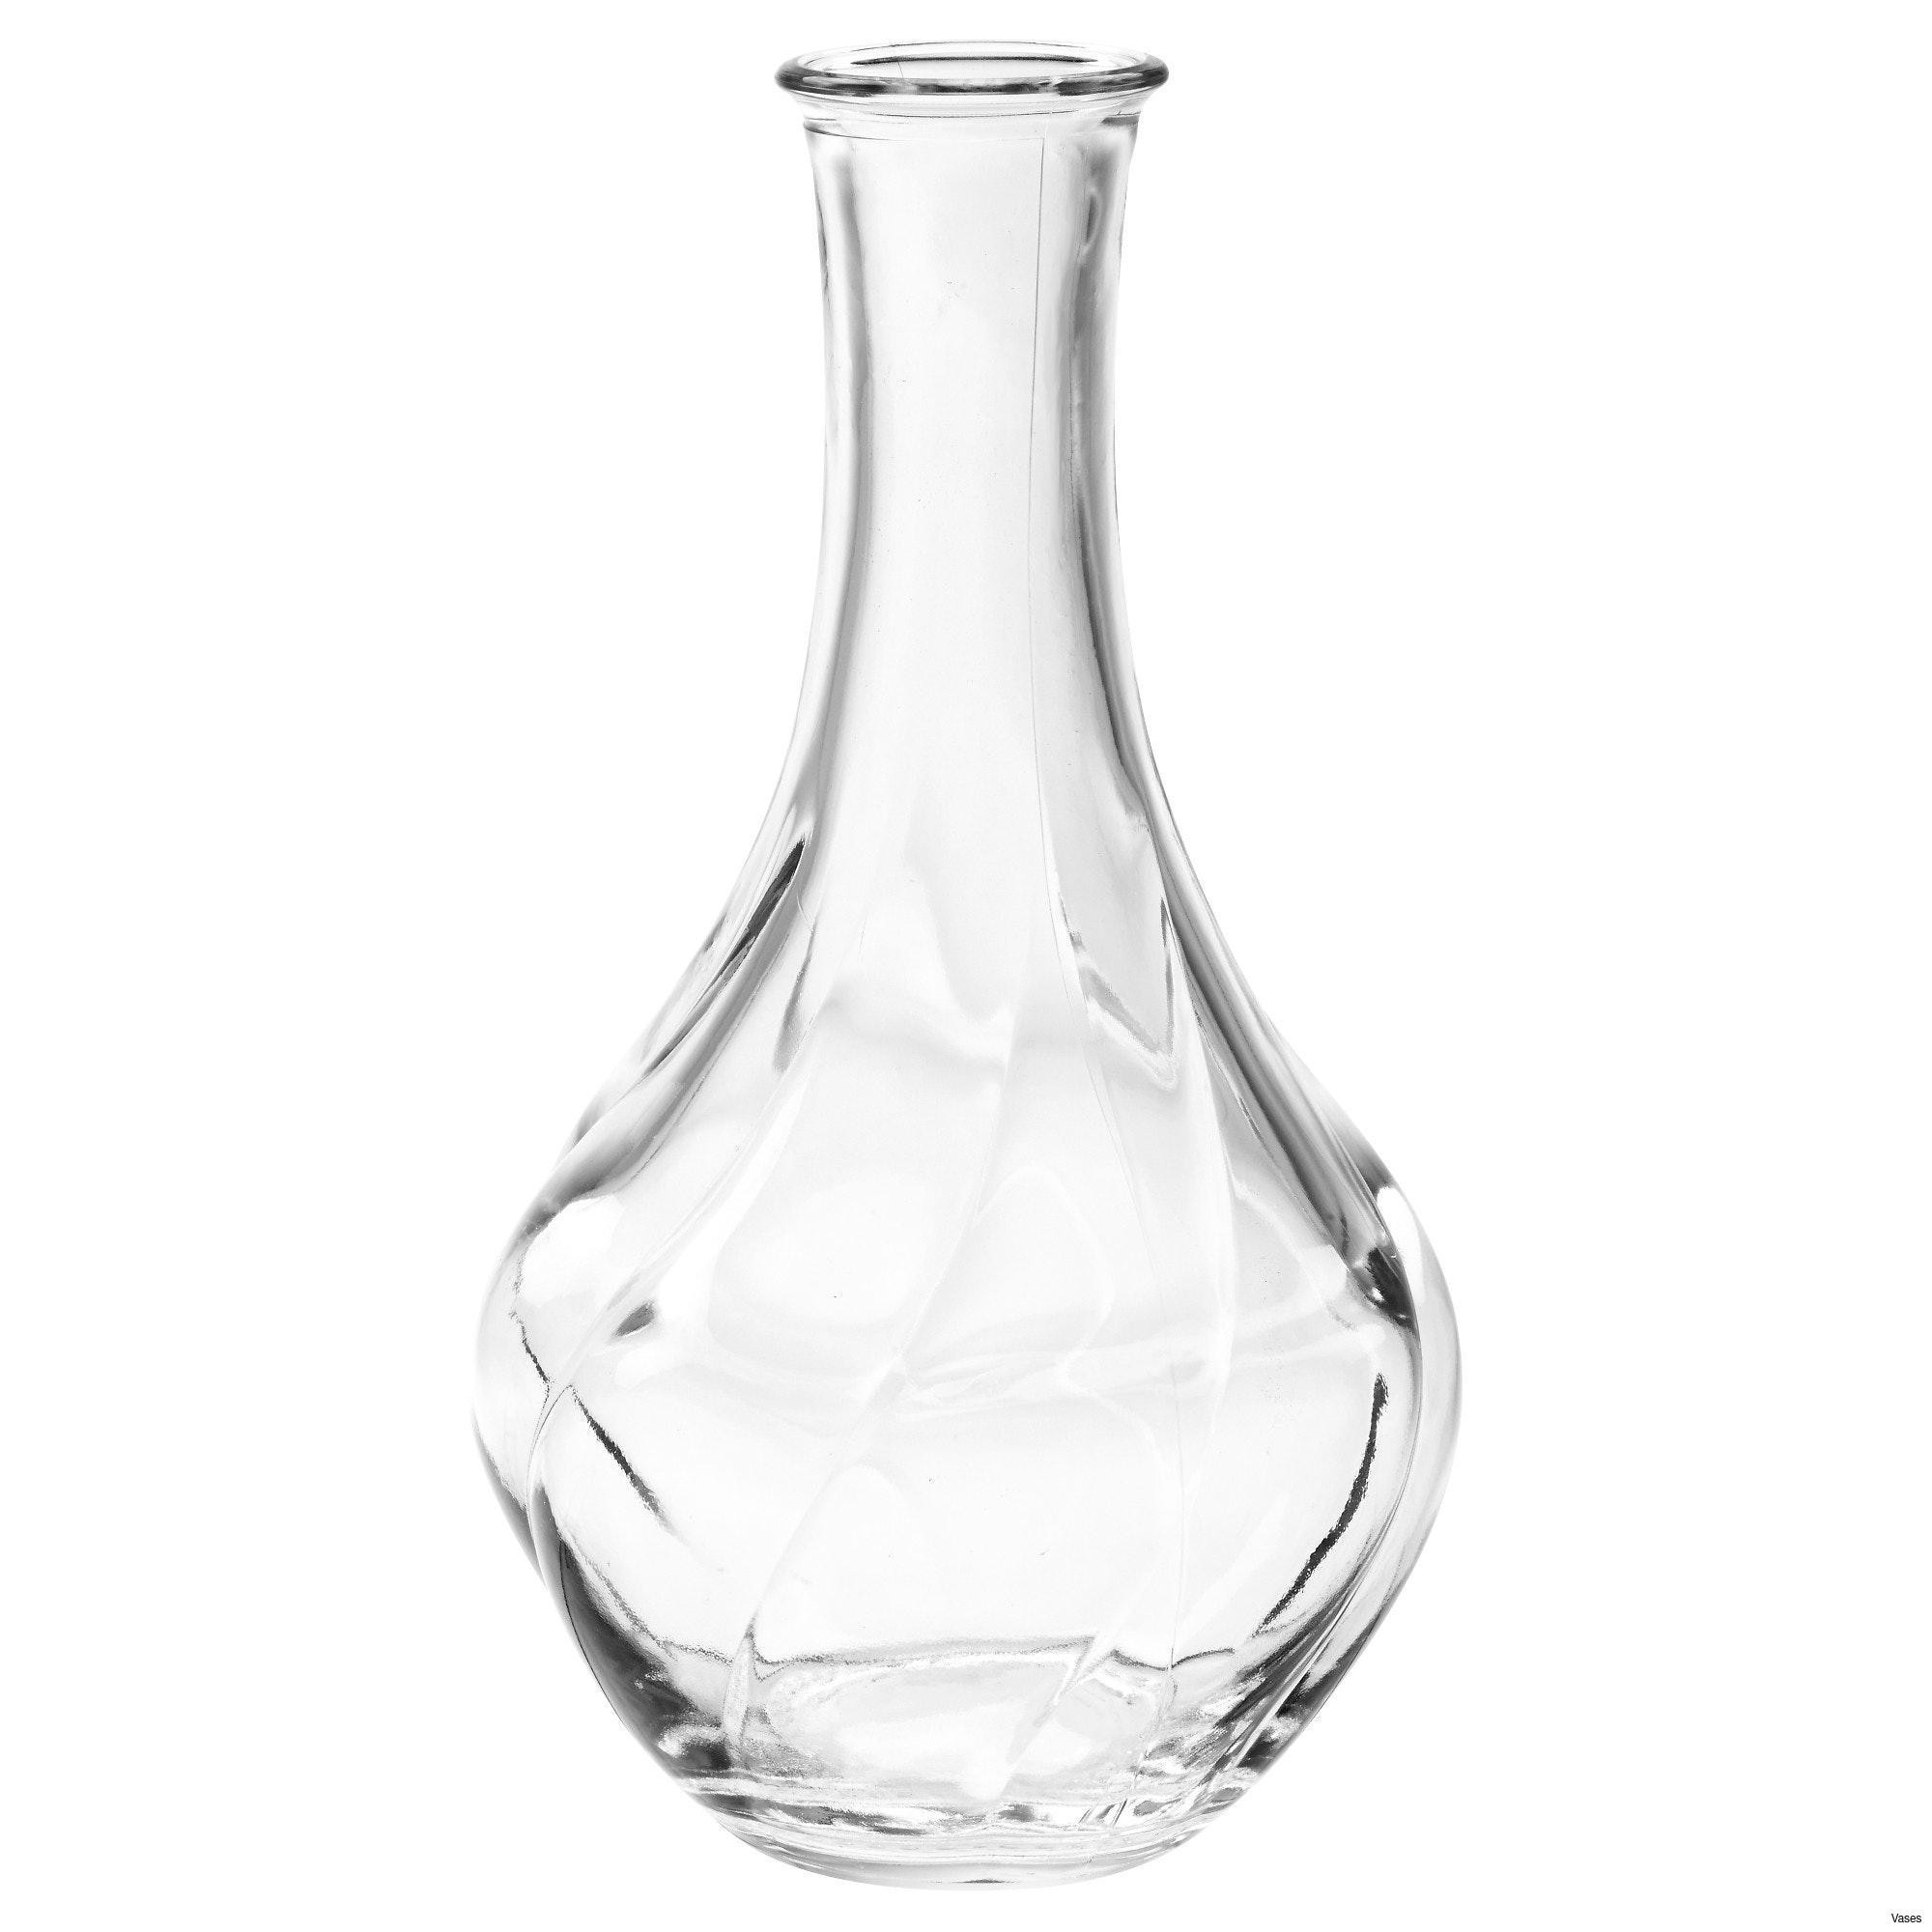 tall chinese vases for sale of tall black vase images living room glass vases fresh clear vase 0d intended for tall black vase images living room glass vases fresh clear vase 0d tags amazing and of